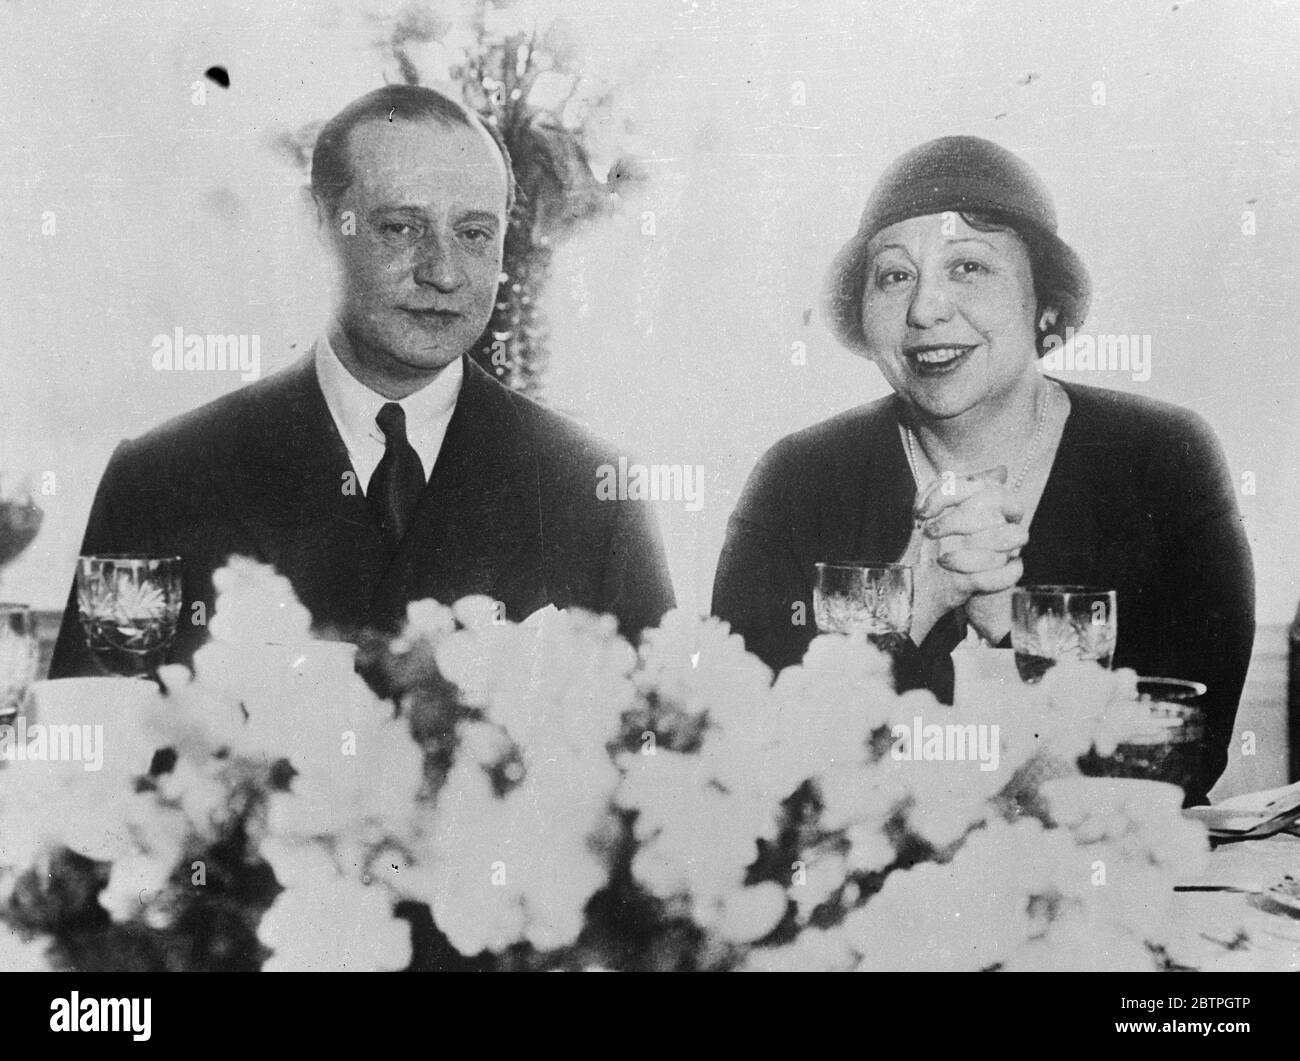 Playwright weds British artist . Miss Zoe Akins , the authoress and playwright was married to Captain Hugo Cecil Levinge Rumbold , the artist and brother of Sir Horace Rumbold , British Ambassador to Berlin , at Pasadena , California . The bride and groom at the wedding breakfast after the ceremony . 22 March 1932 Stock Photo